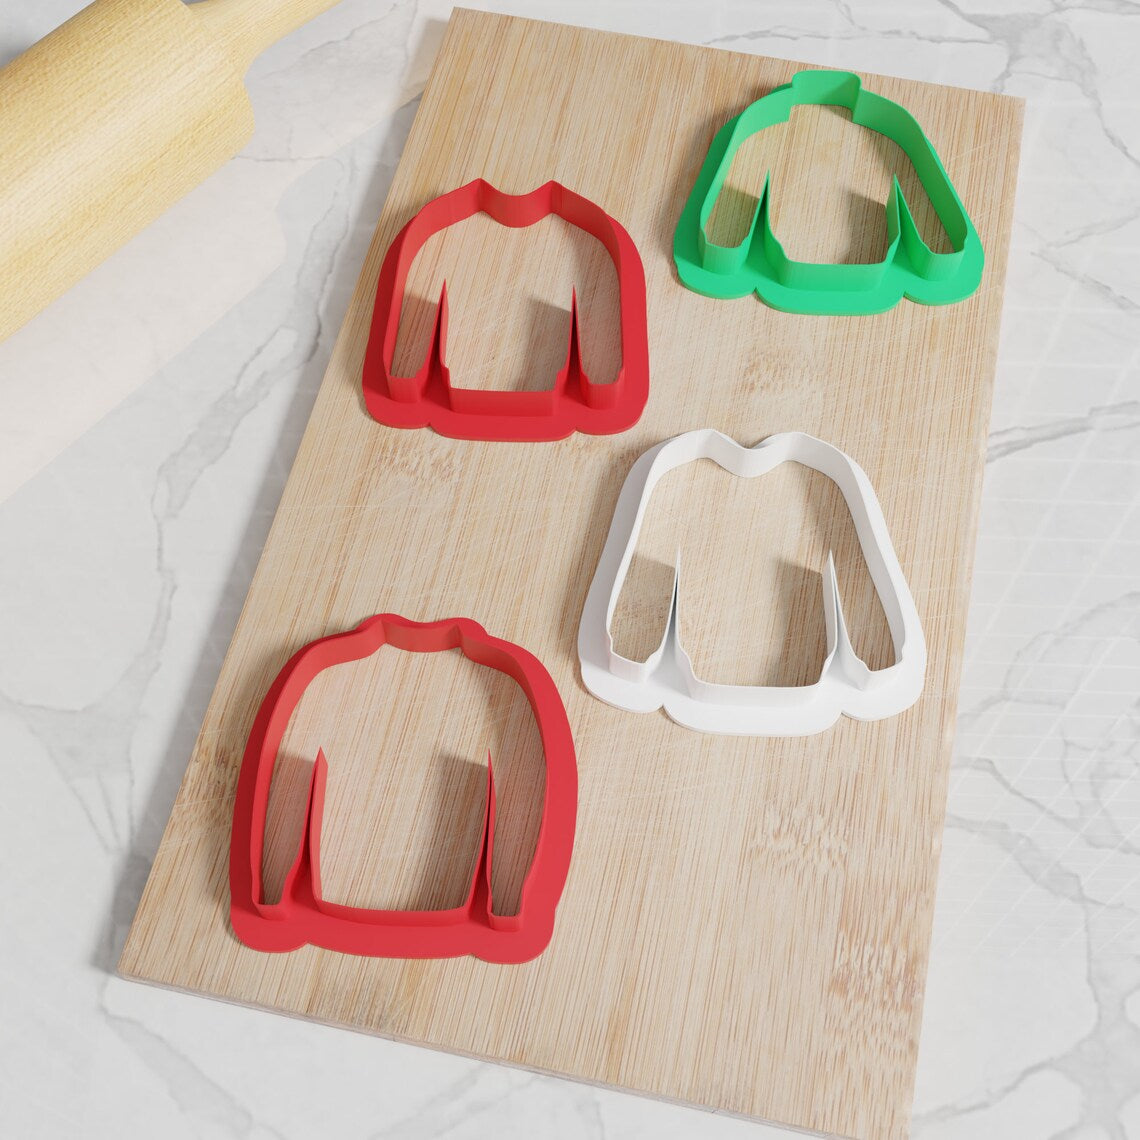 Christmas Sweater Cookie Cutters. 4 Unique Christmas Sweater Cookie Cutters From 3 Inch to 8 Inch Height!